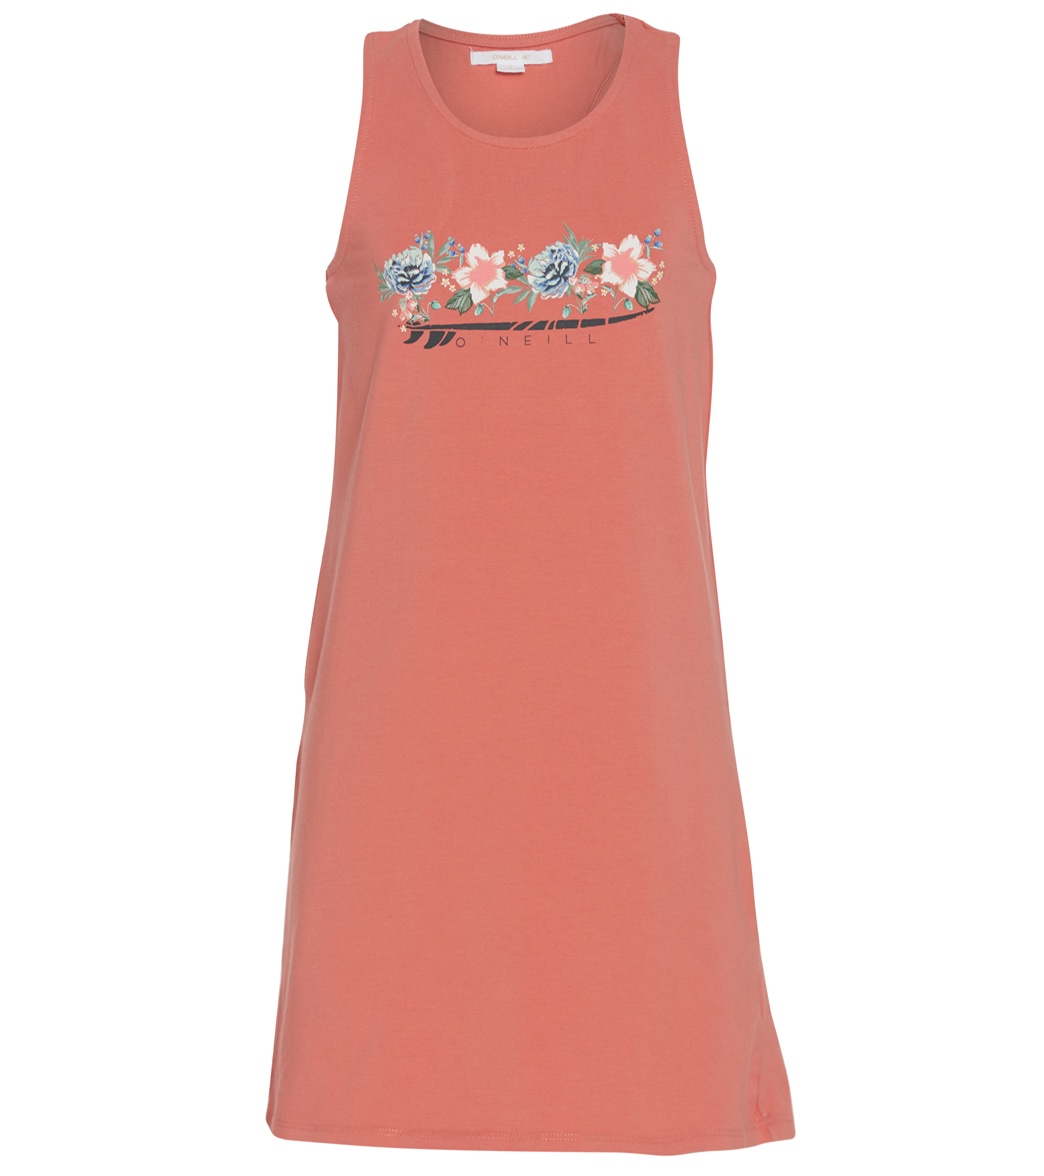 O'neill Girls' Lillie Dress - Faded Rose Large Cotton - Swimoutlet.com